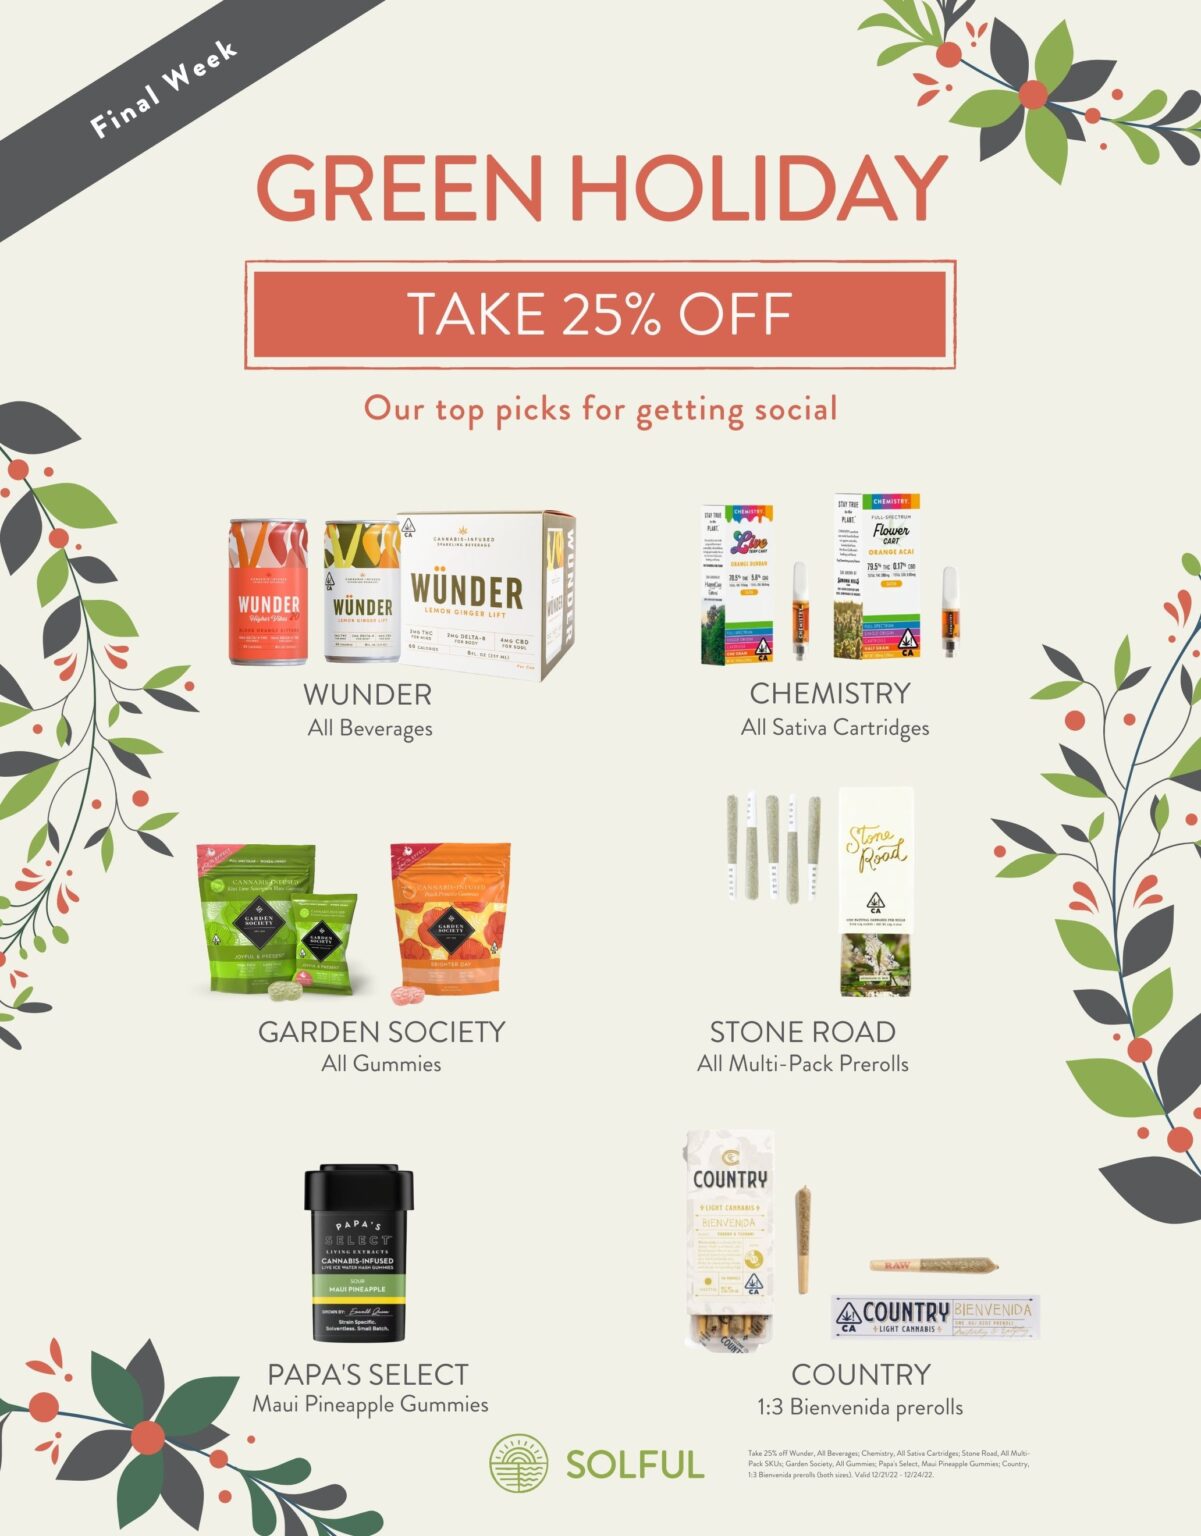 Green Holiday Getting Social Deals